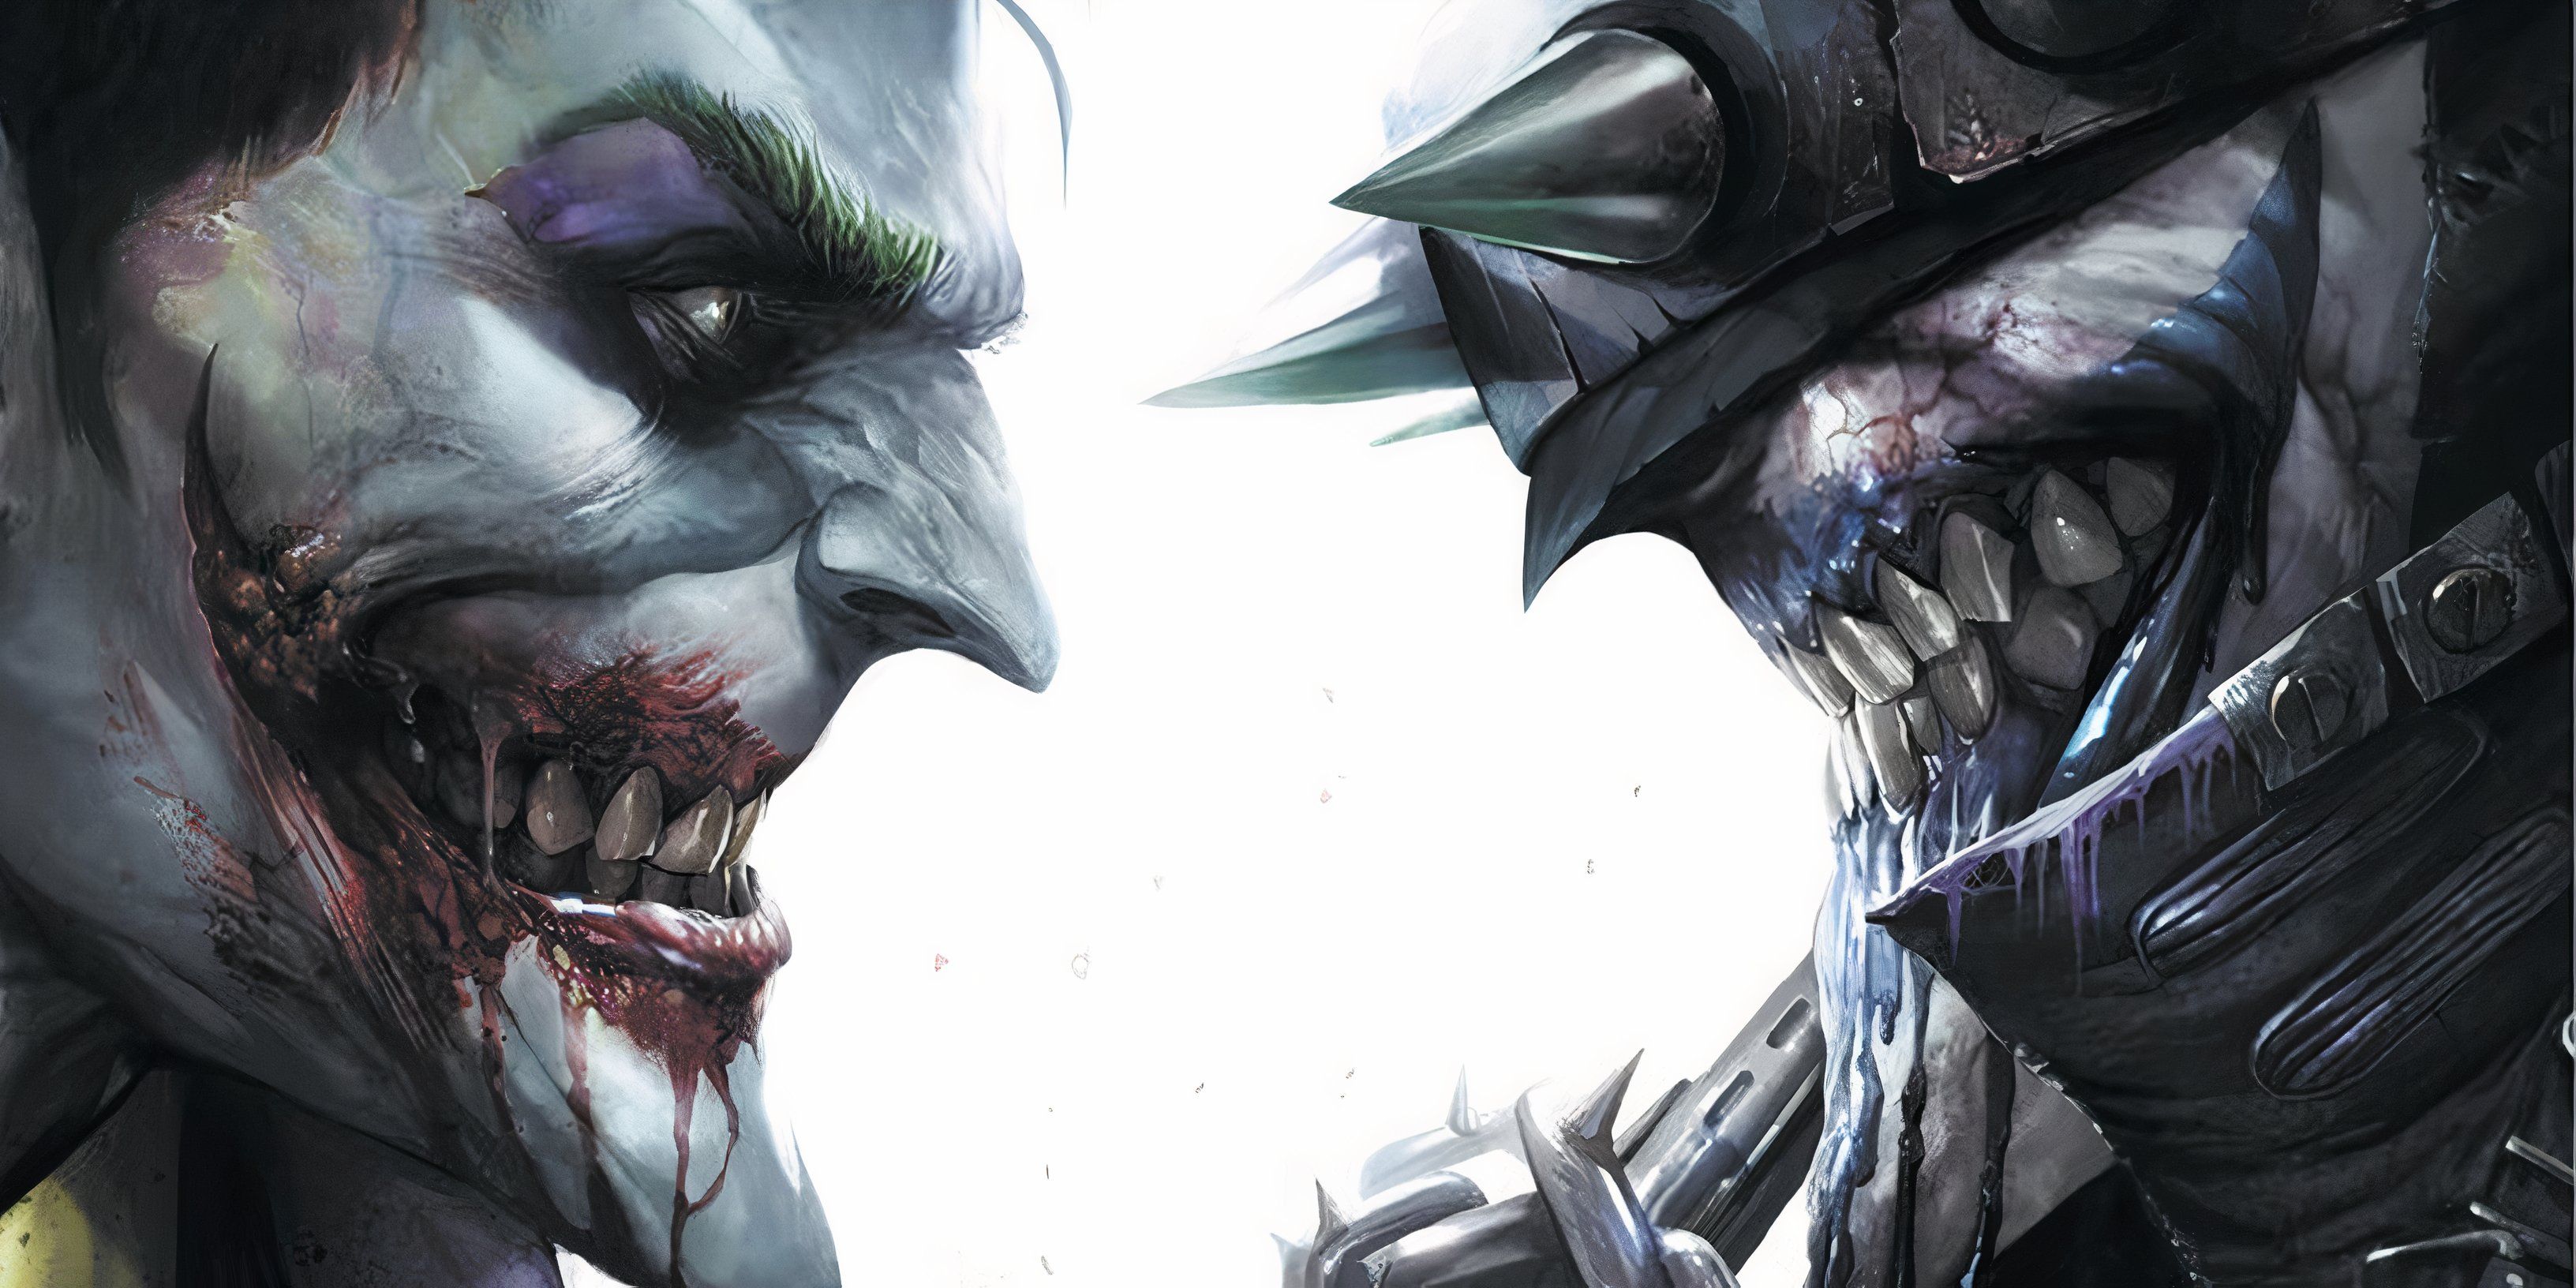 The Joker (left) and The Batman Who Laughs (right)